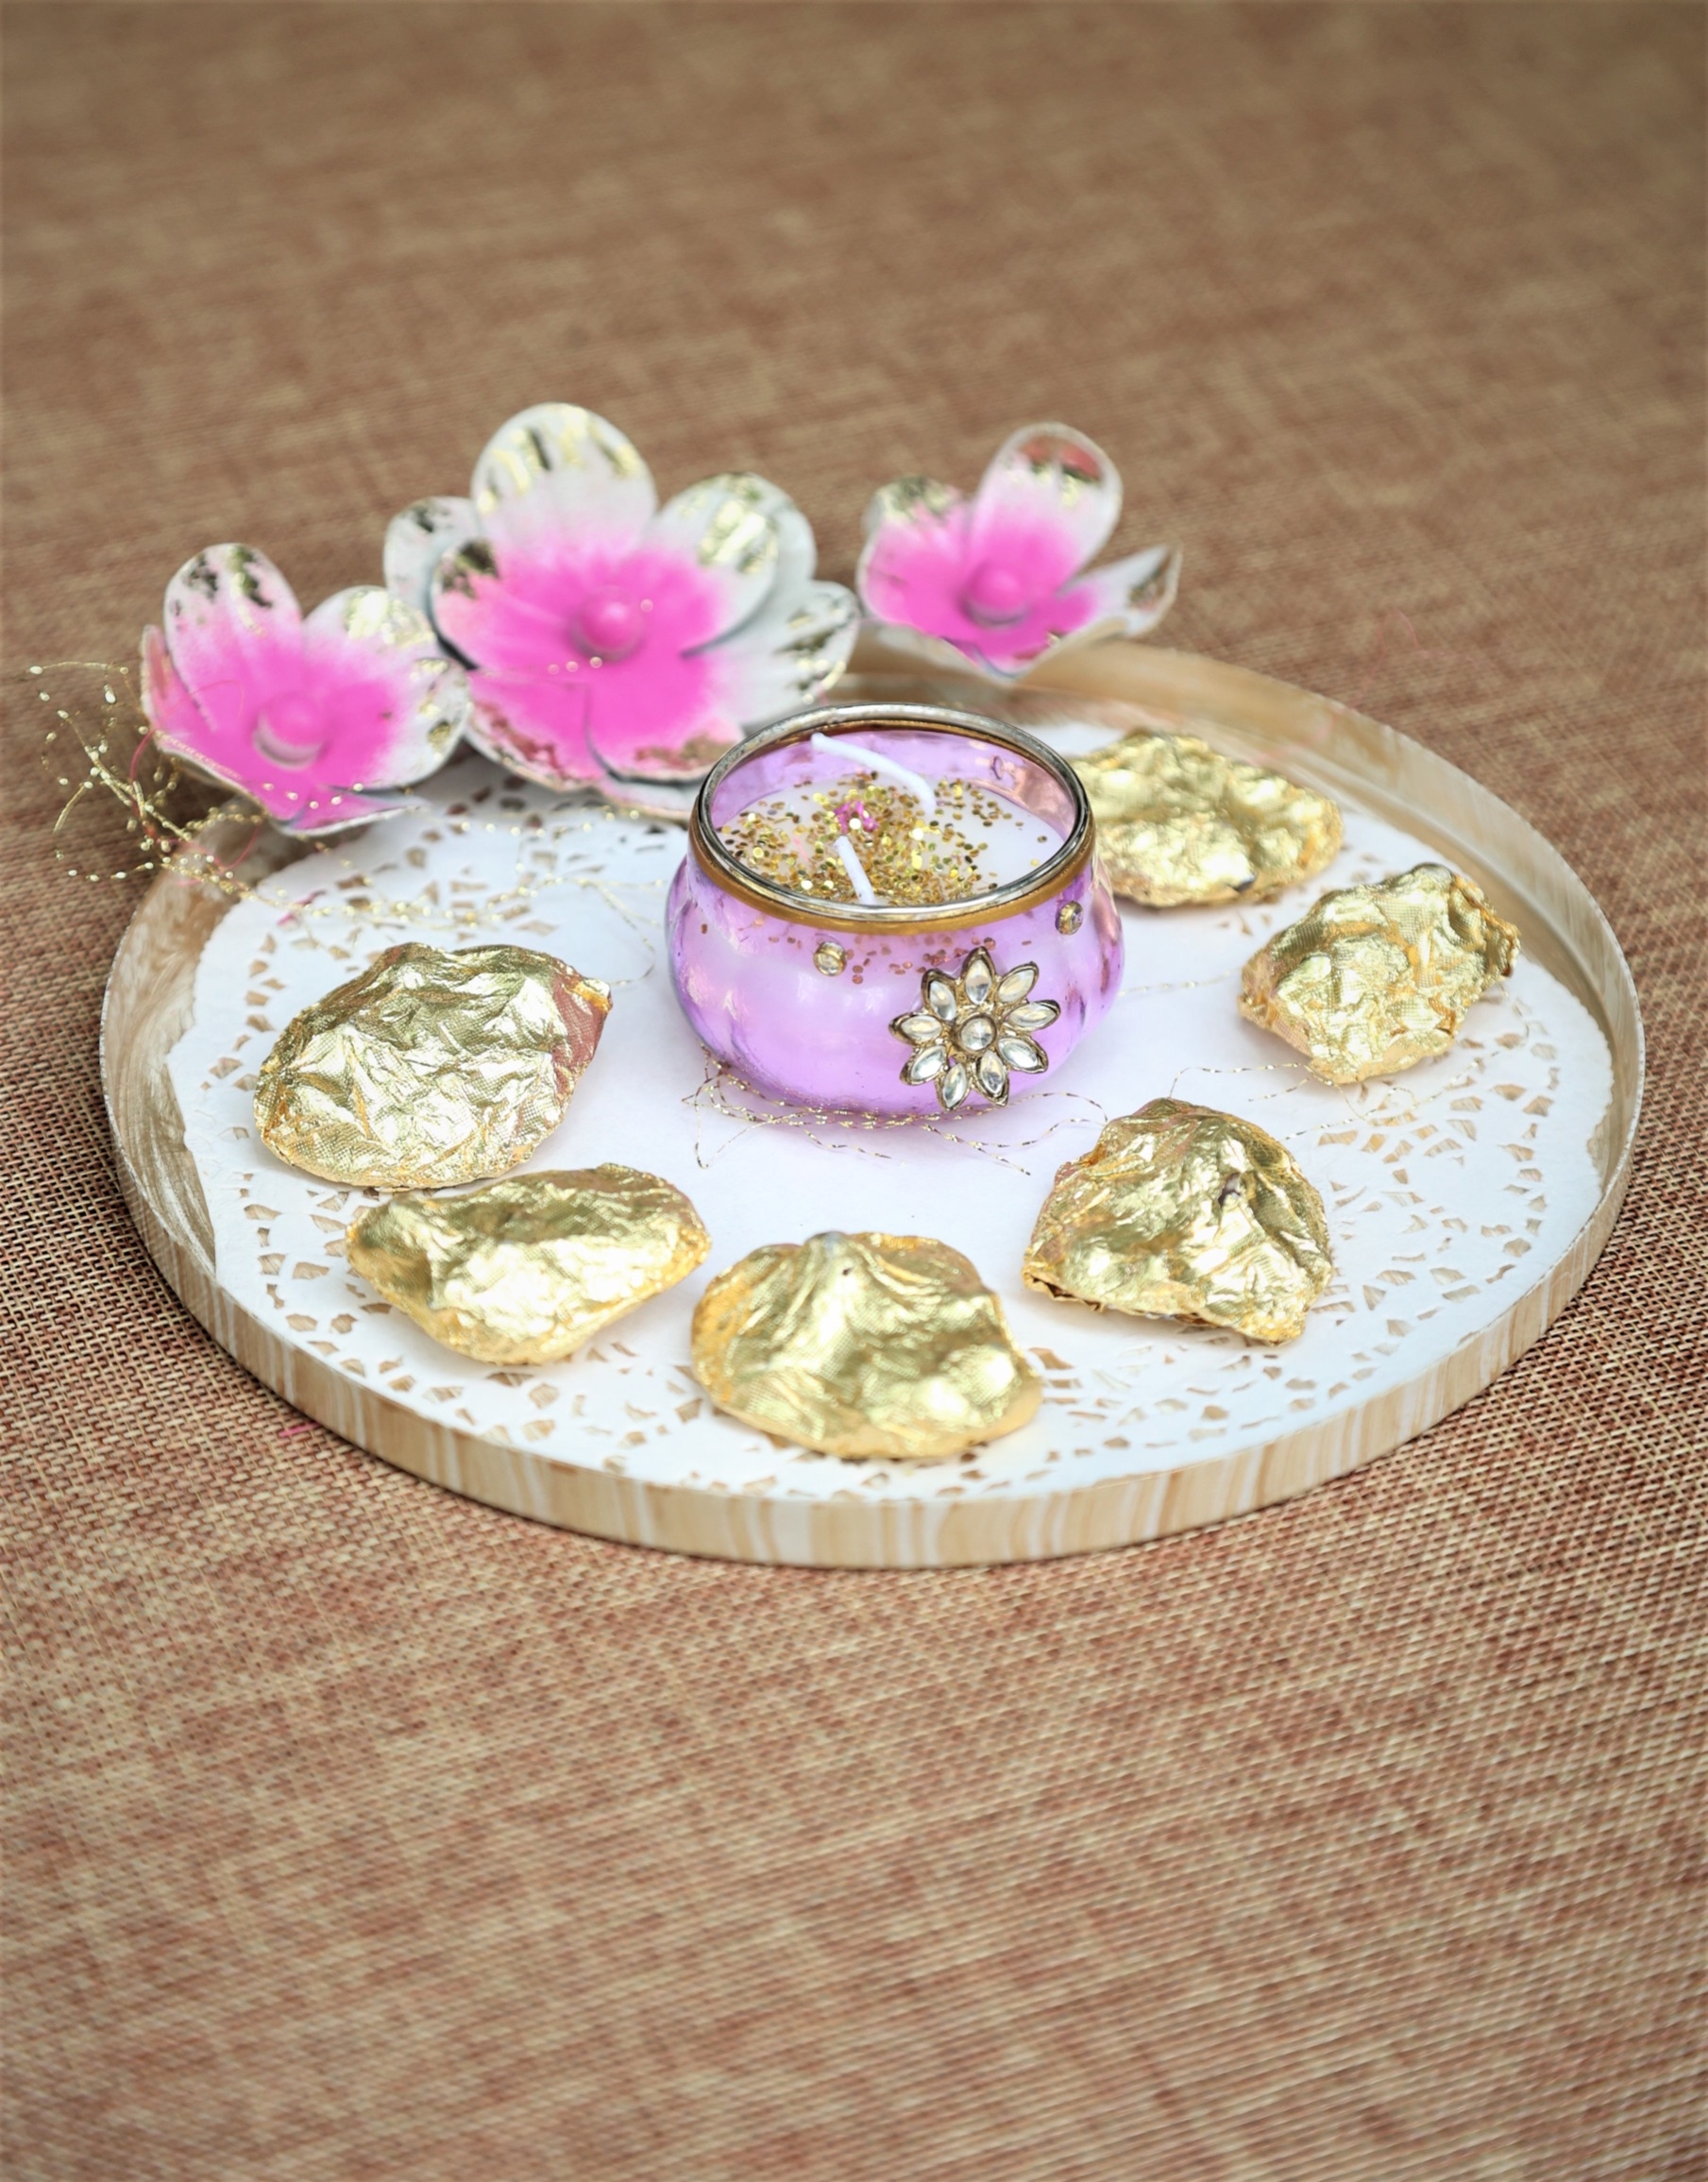 Floral art | White/Gold Foil Metal Plate (S) undefined